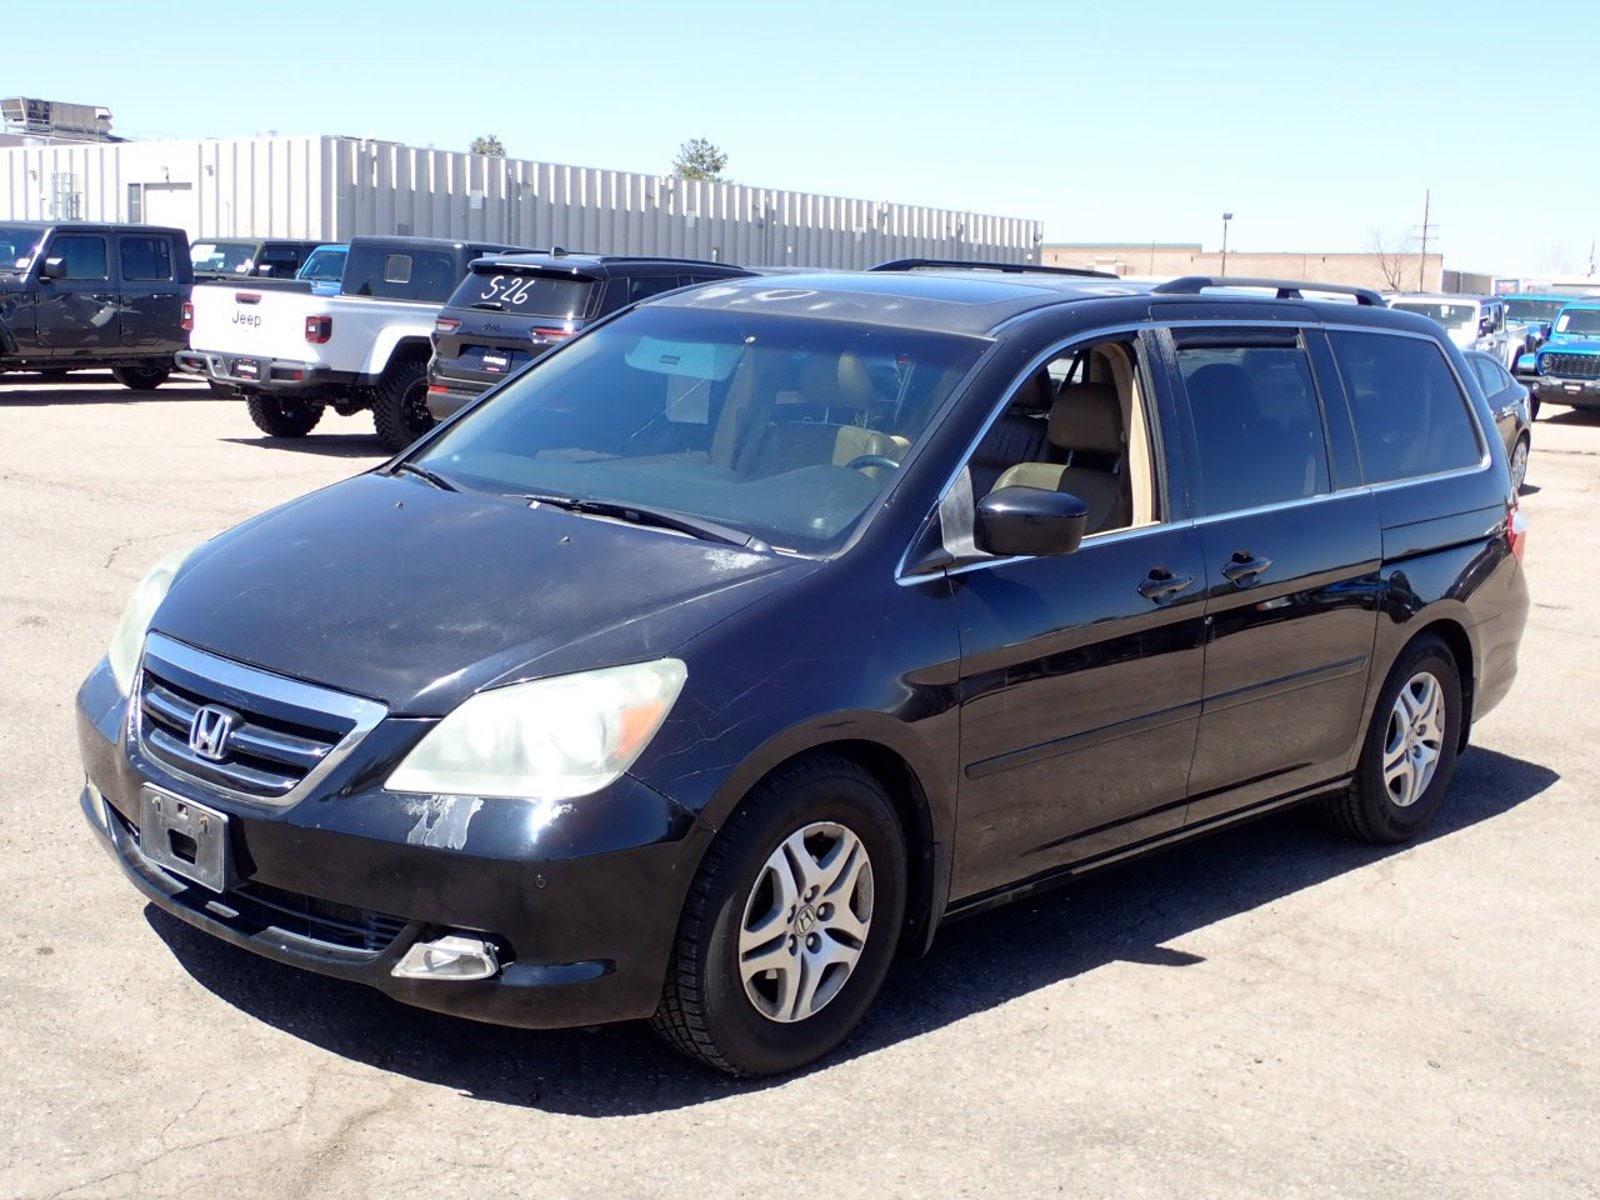 Used 2005 Honda Odyssey Touring with VIN 5FNRL38835B027924 for sale in Centennial, CO